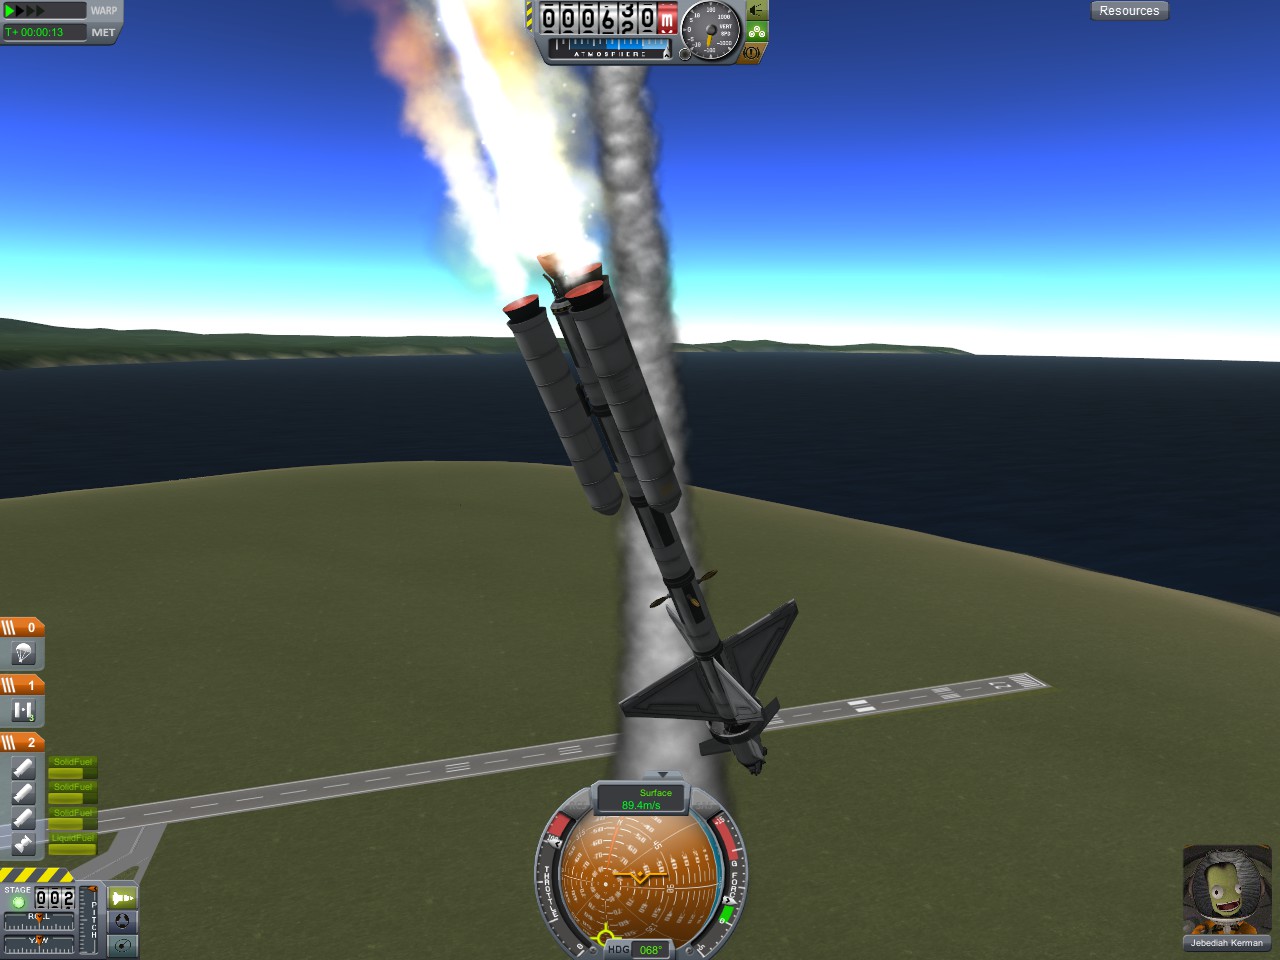 Another successful launch!